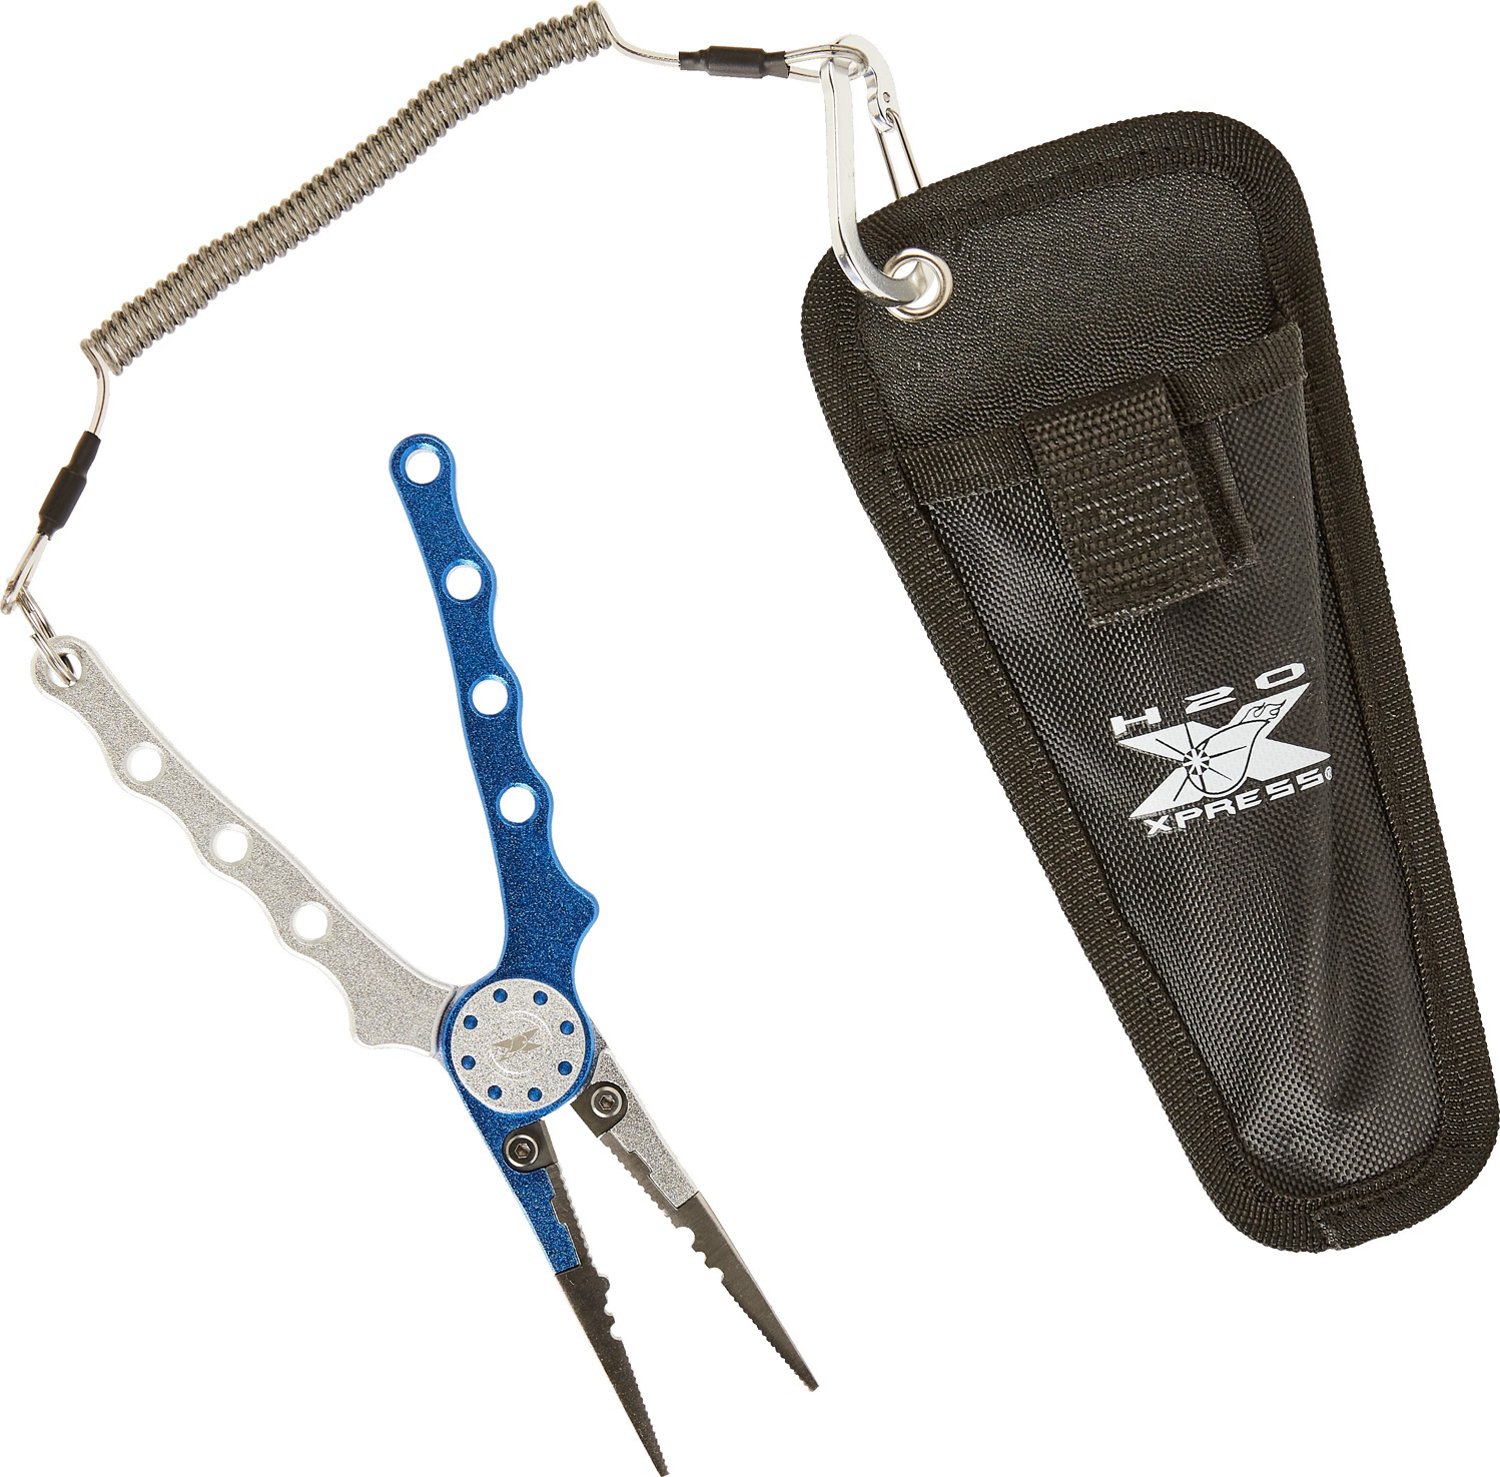 H2O XPRESS 7.5 in Aluminum Pliers